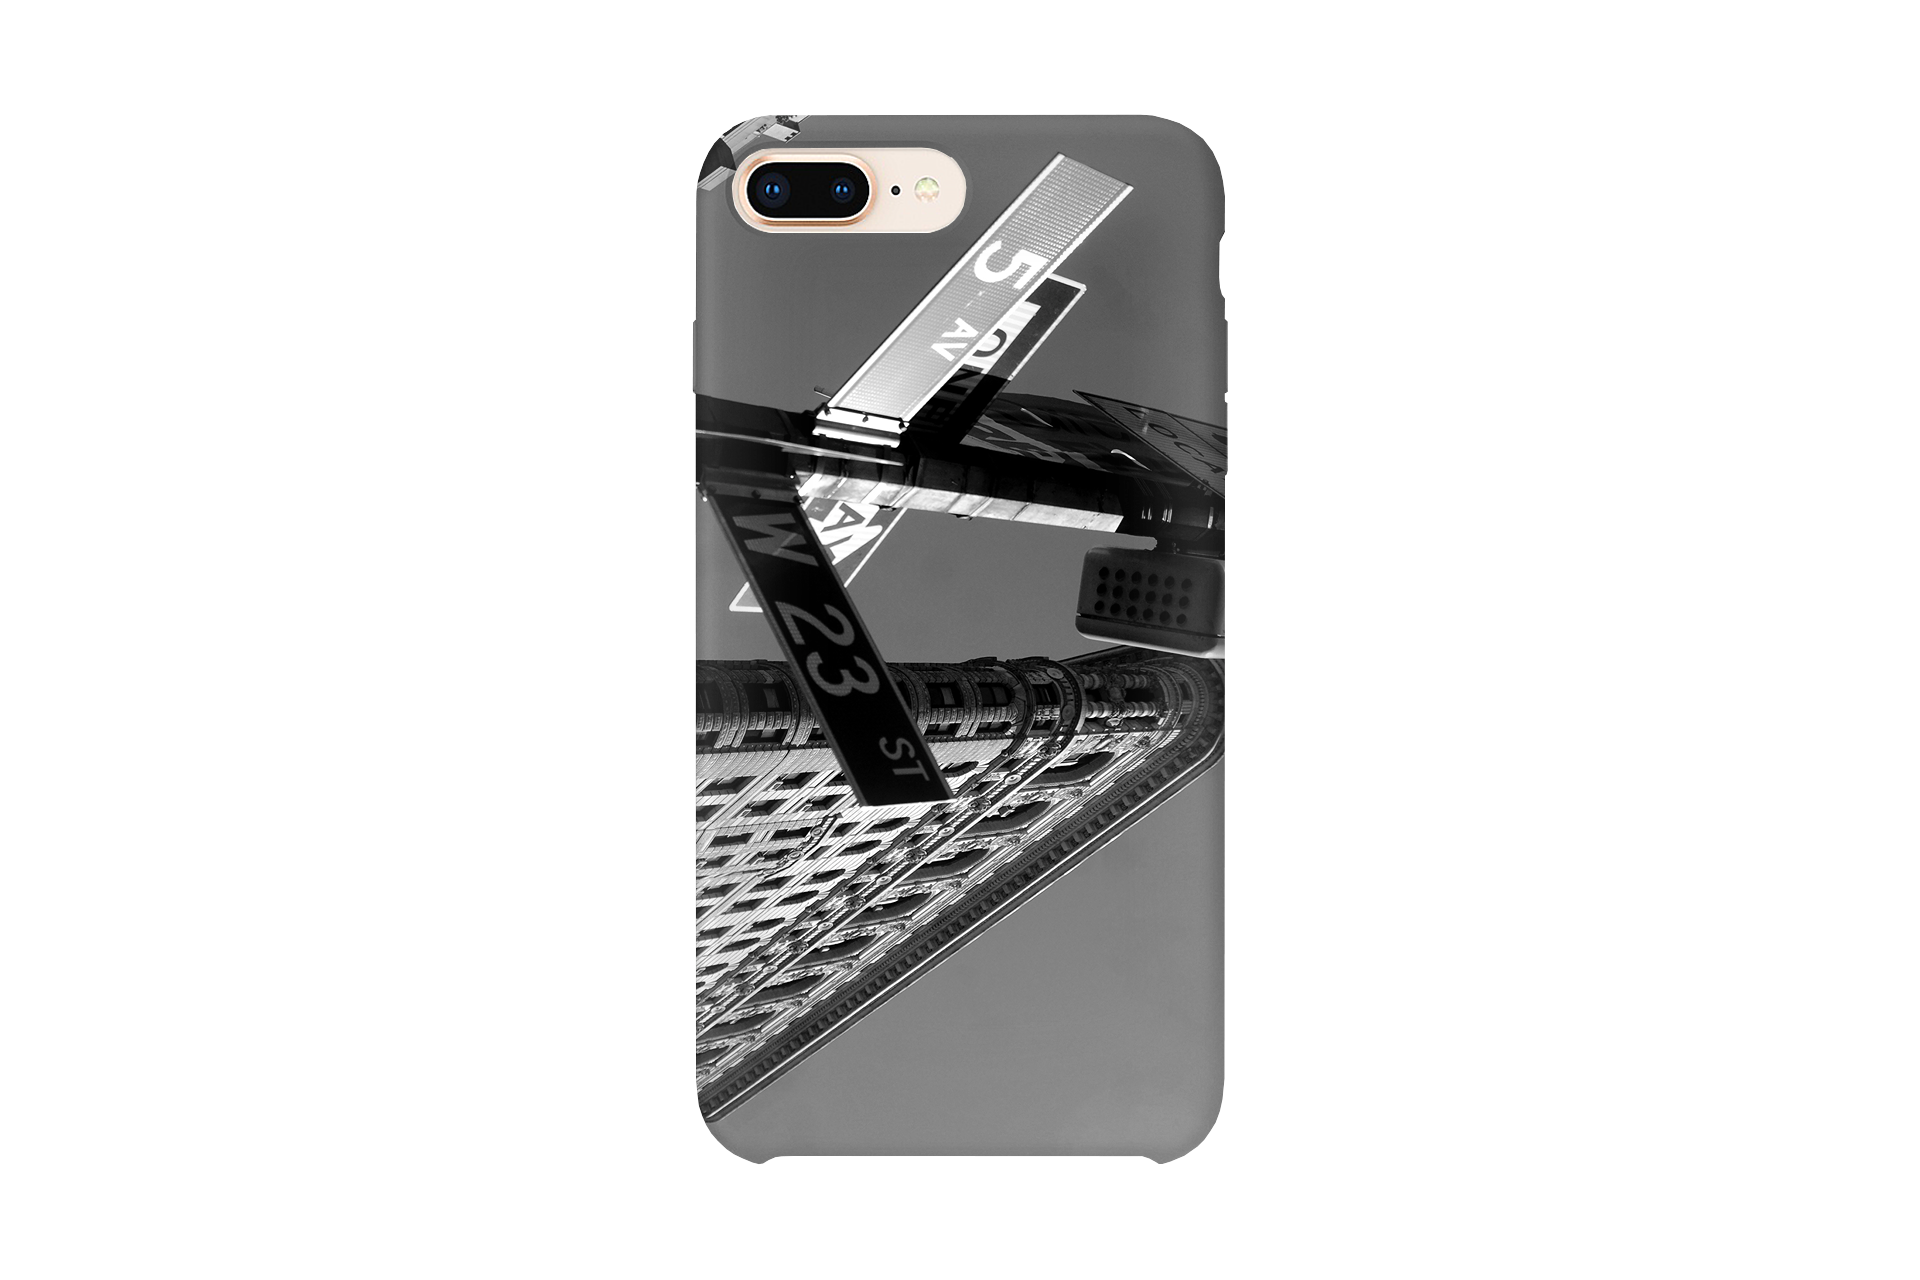 Flatiron 5th Ave iPhone case by Mike Lindwasser